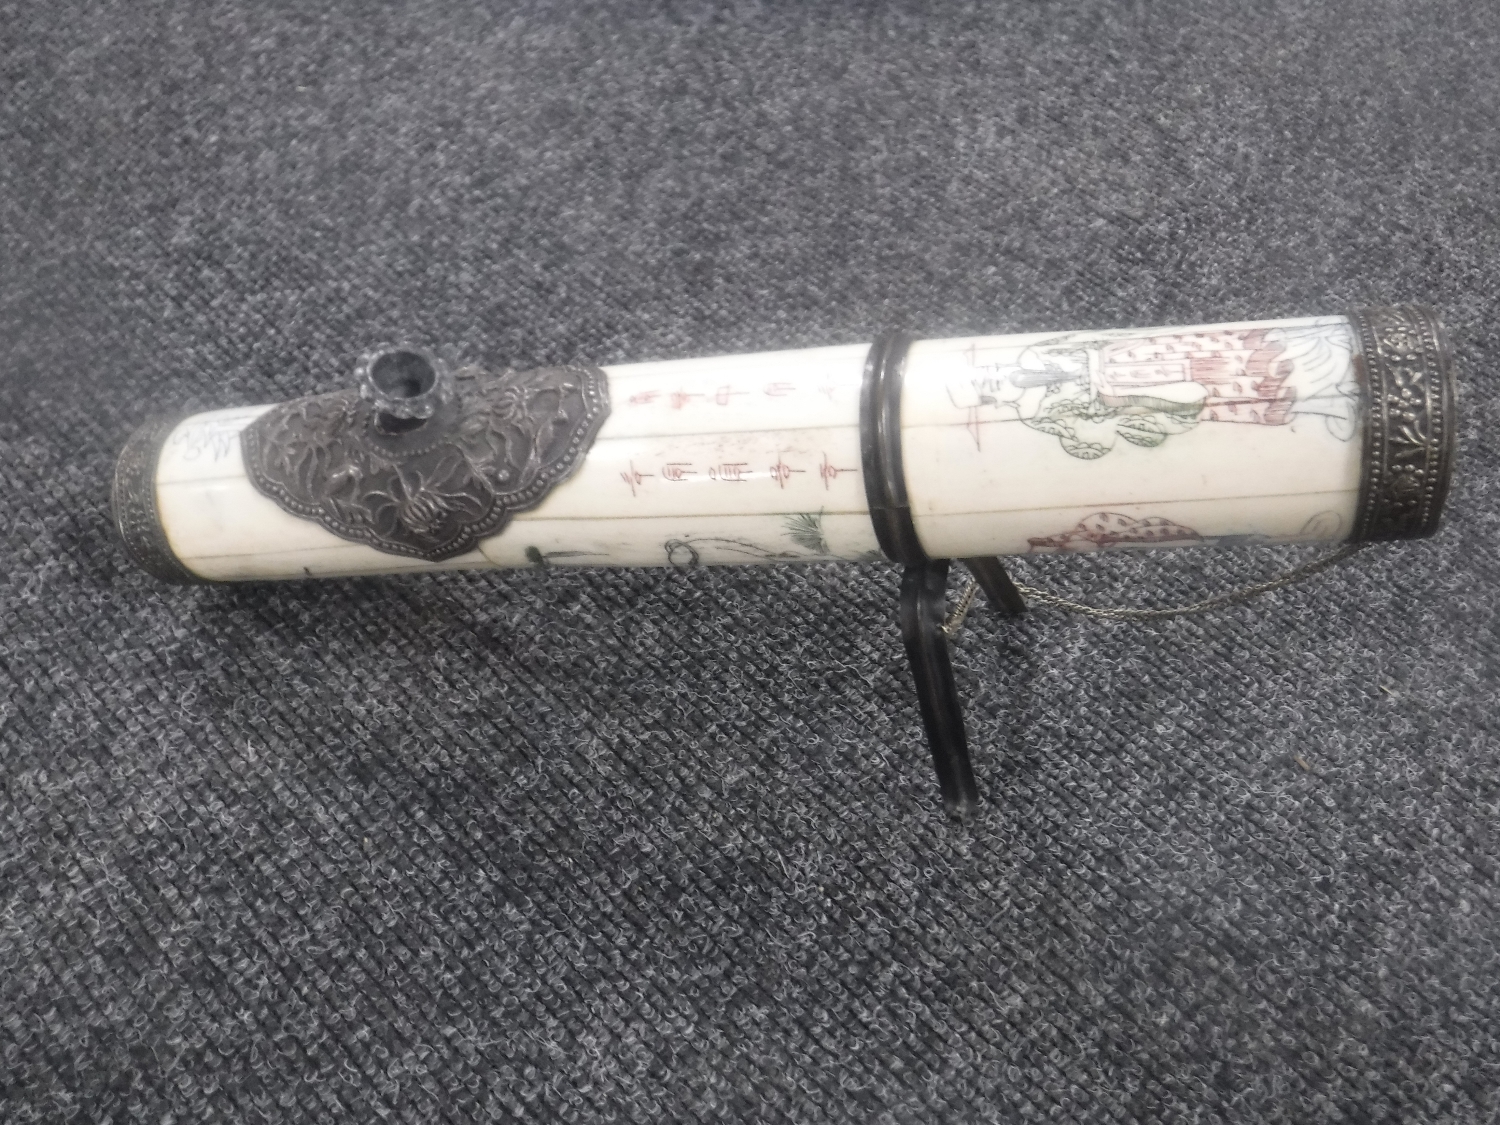 An ornate Chinese resin and metal pipe